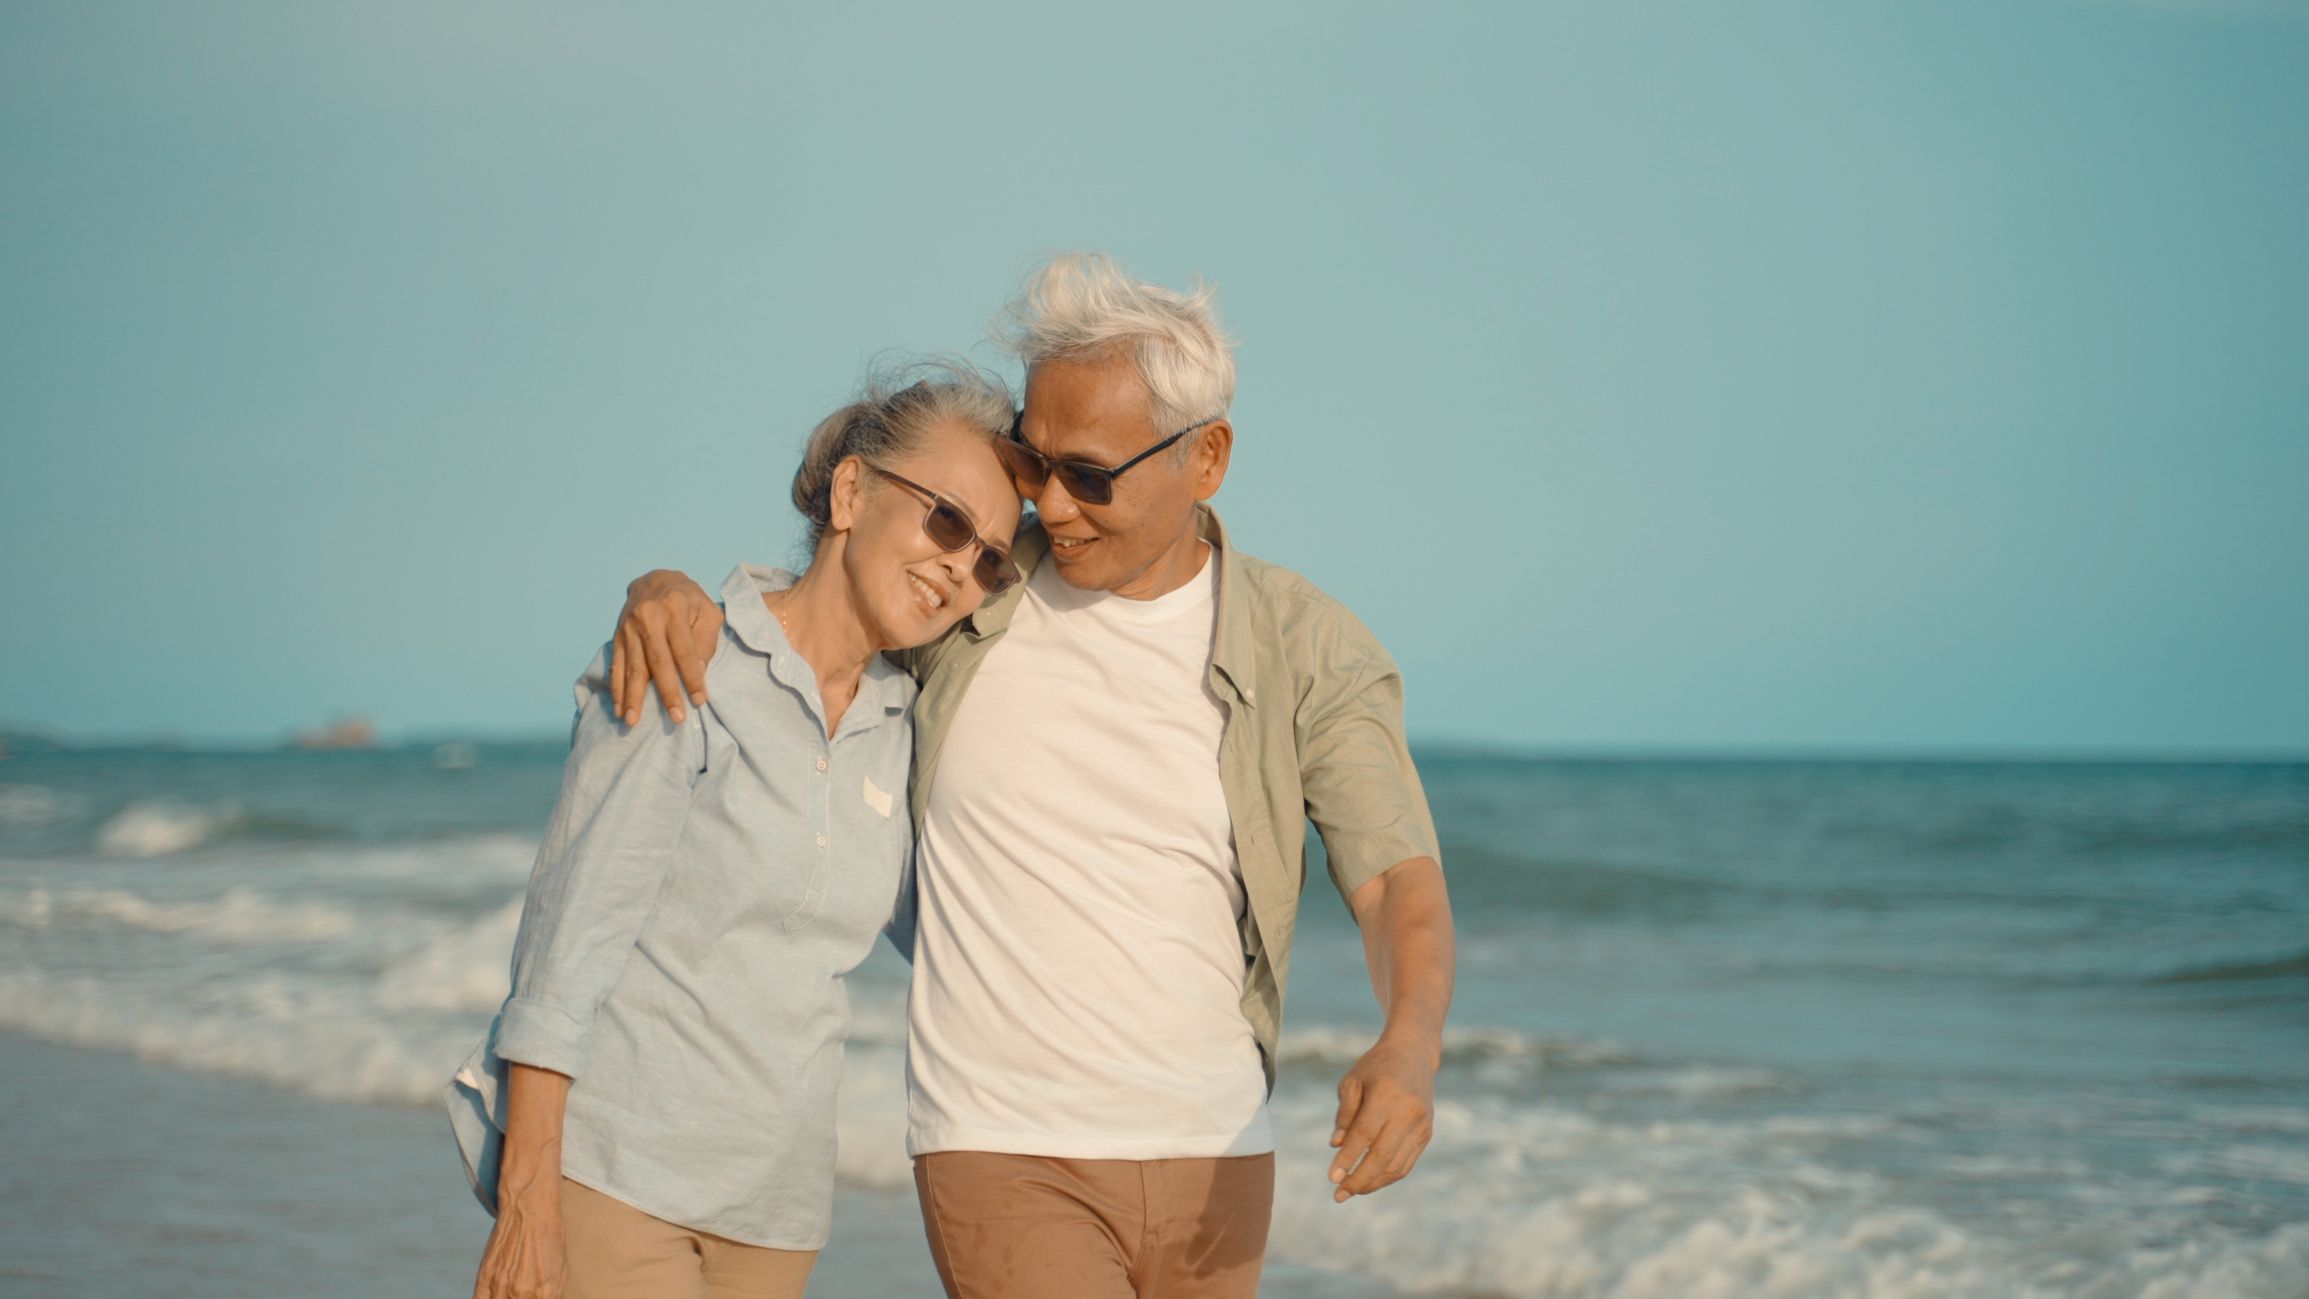 senior couple embrace on the beach at not sunny day royalty free image 1650487205